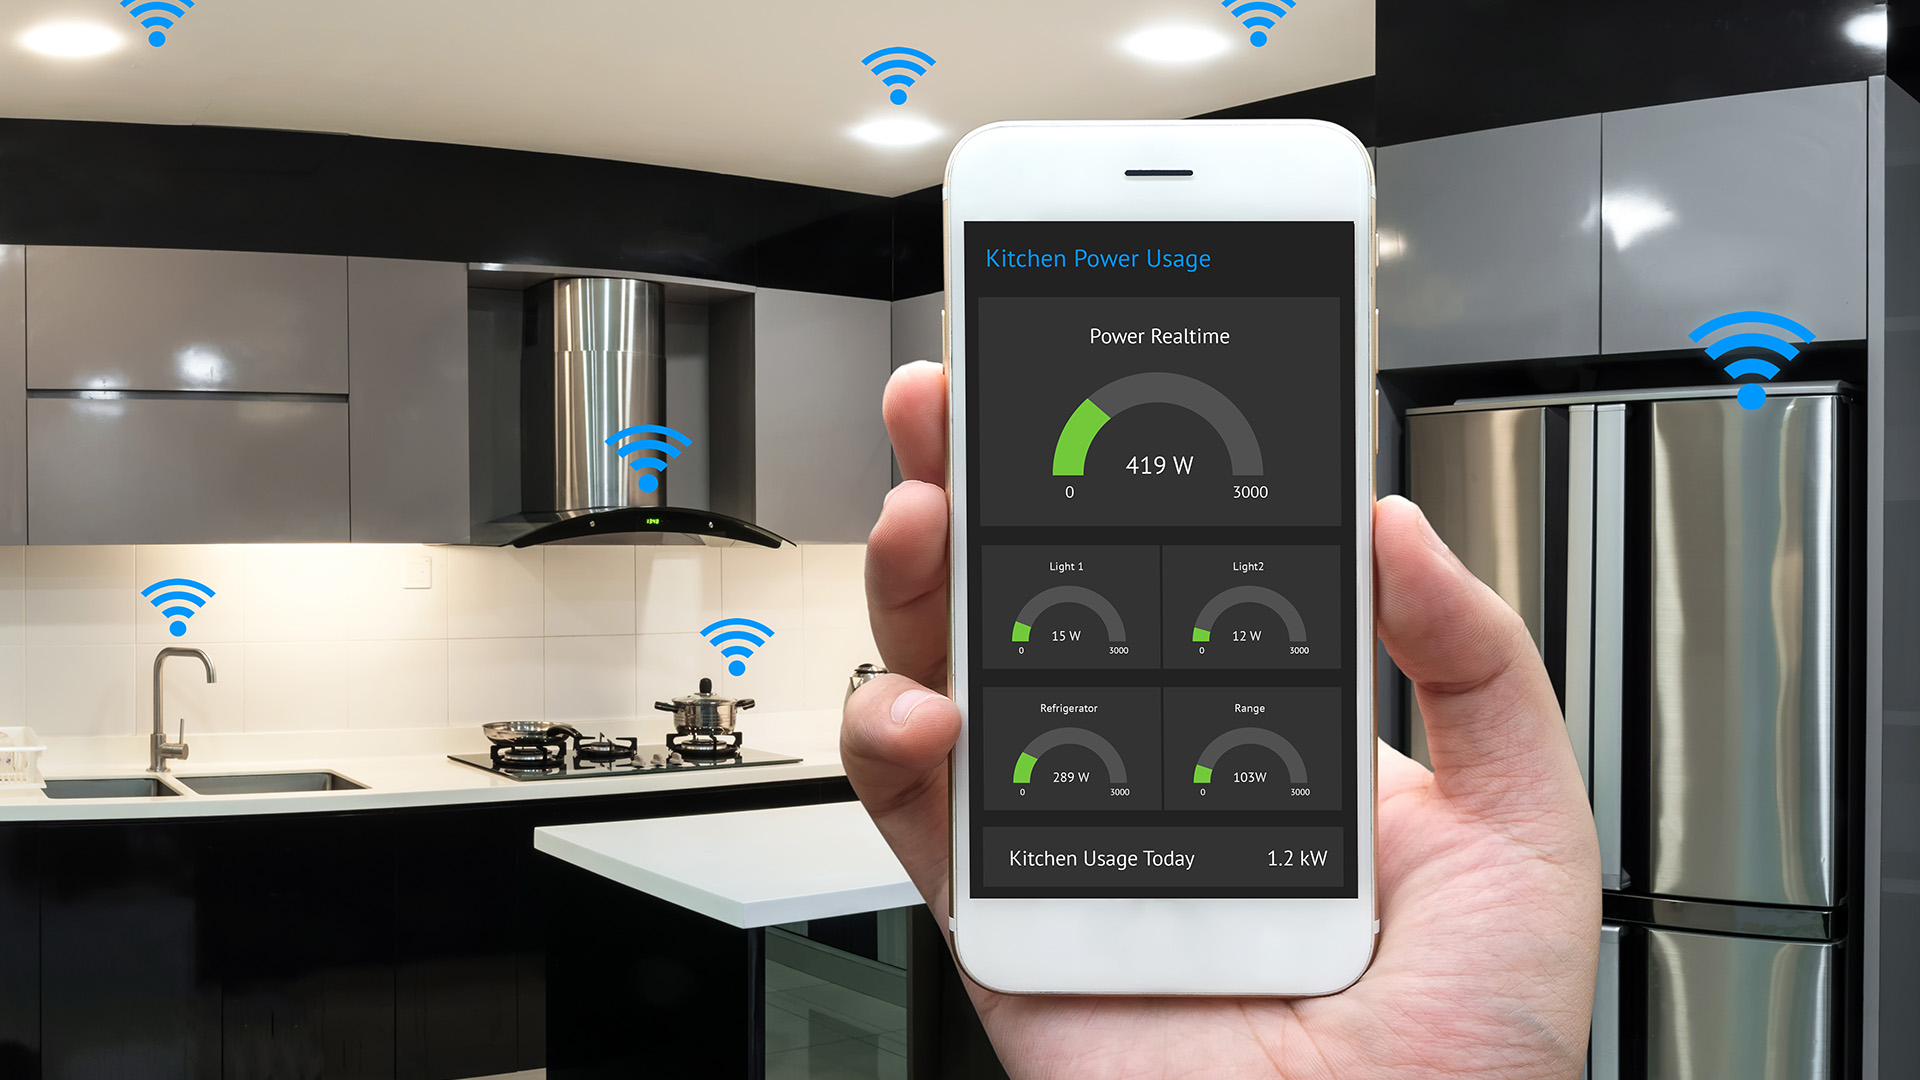 IOT Devices in Kitchen being Controlled by a Mobile App